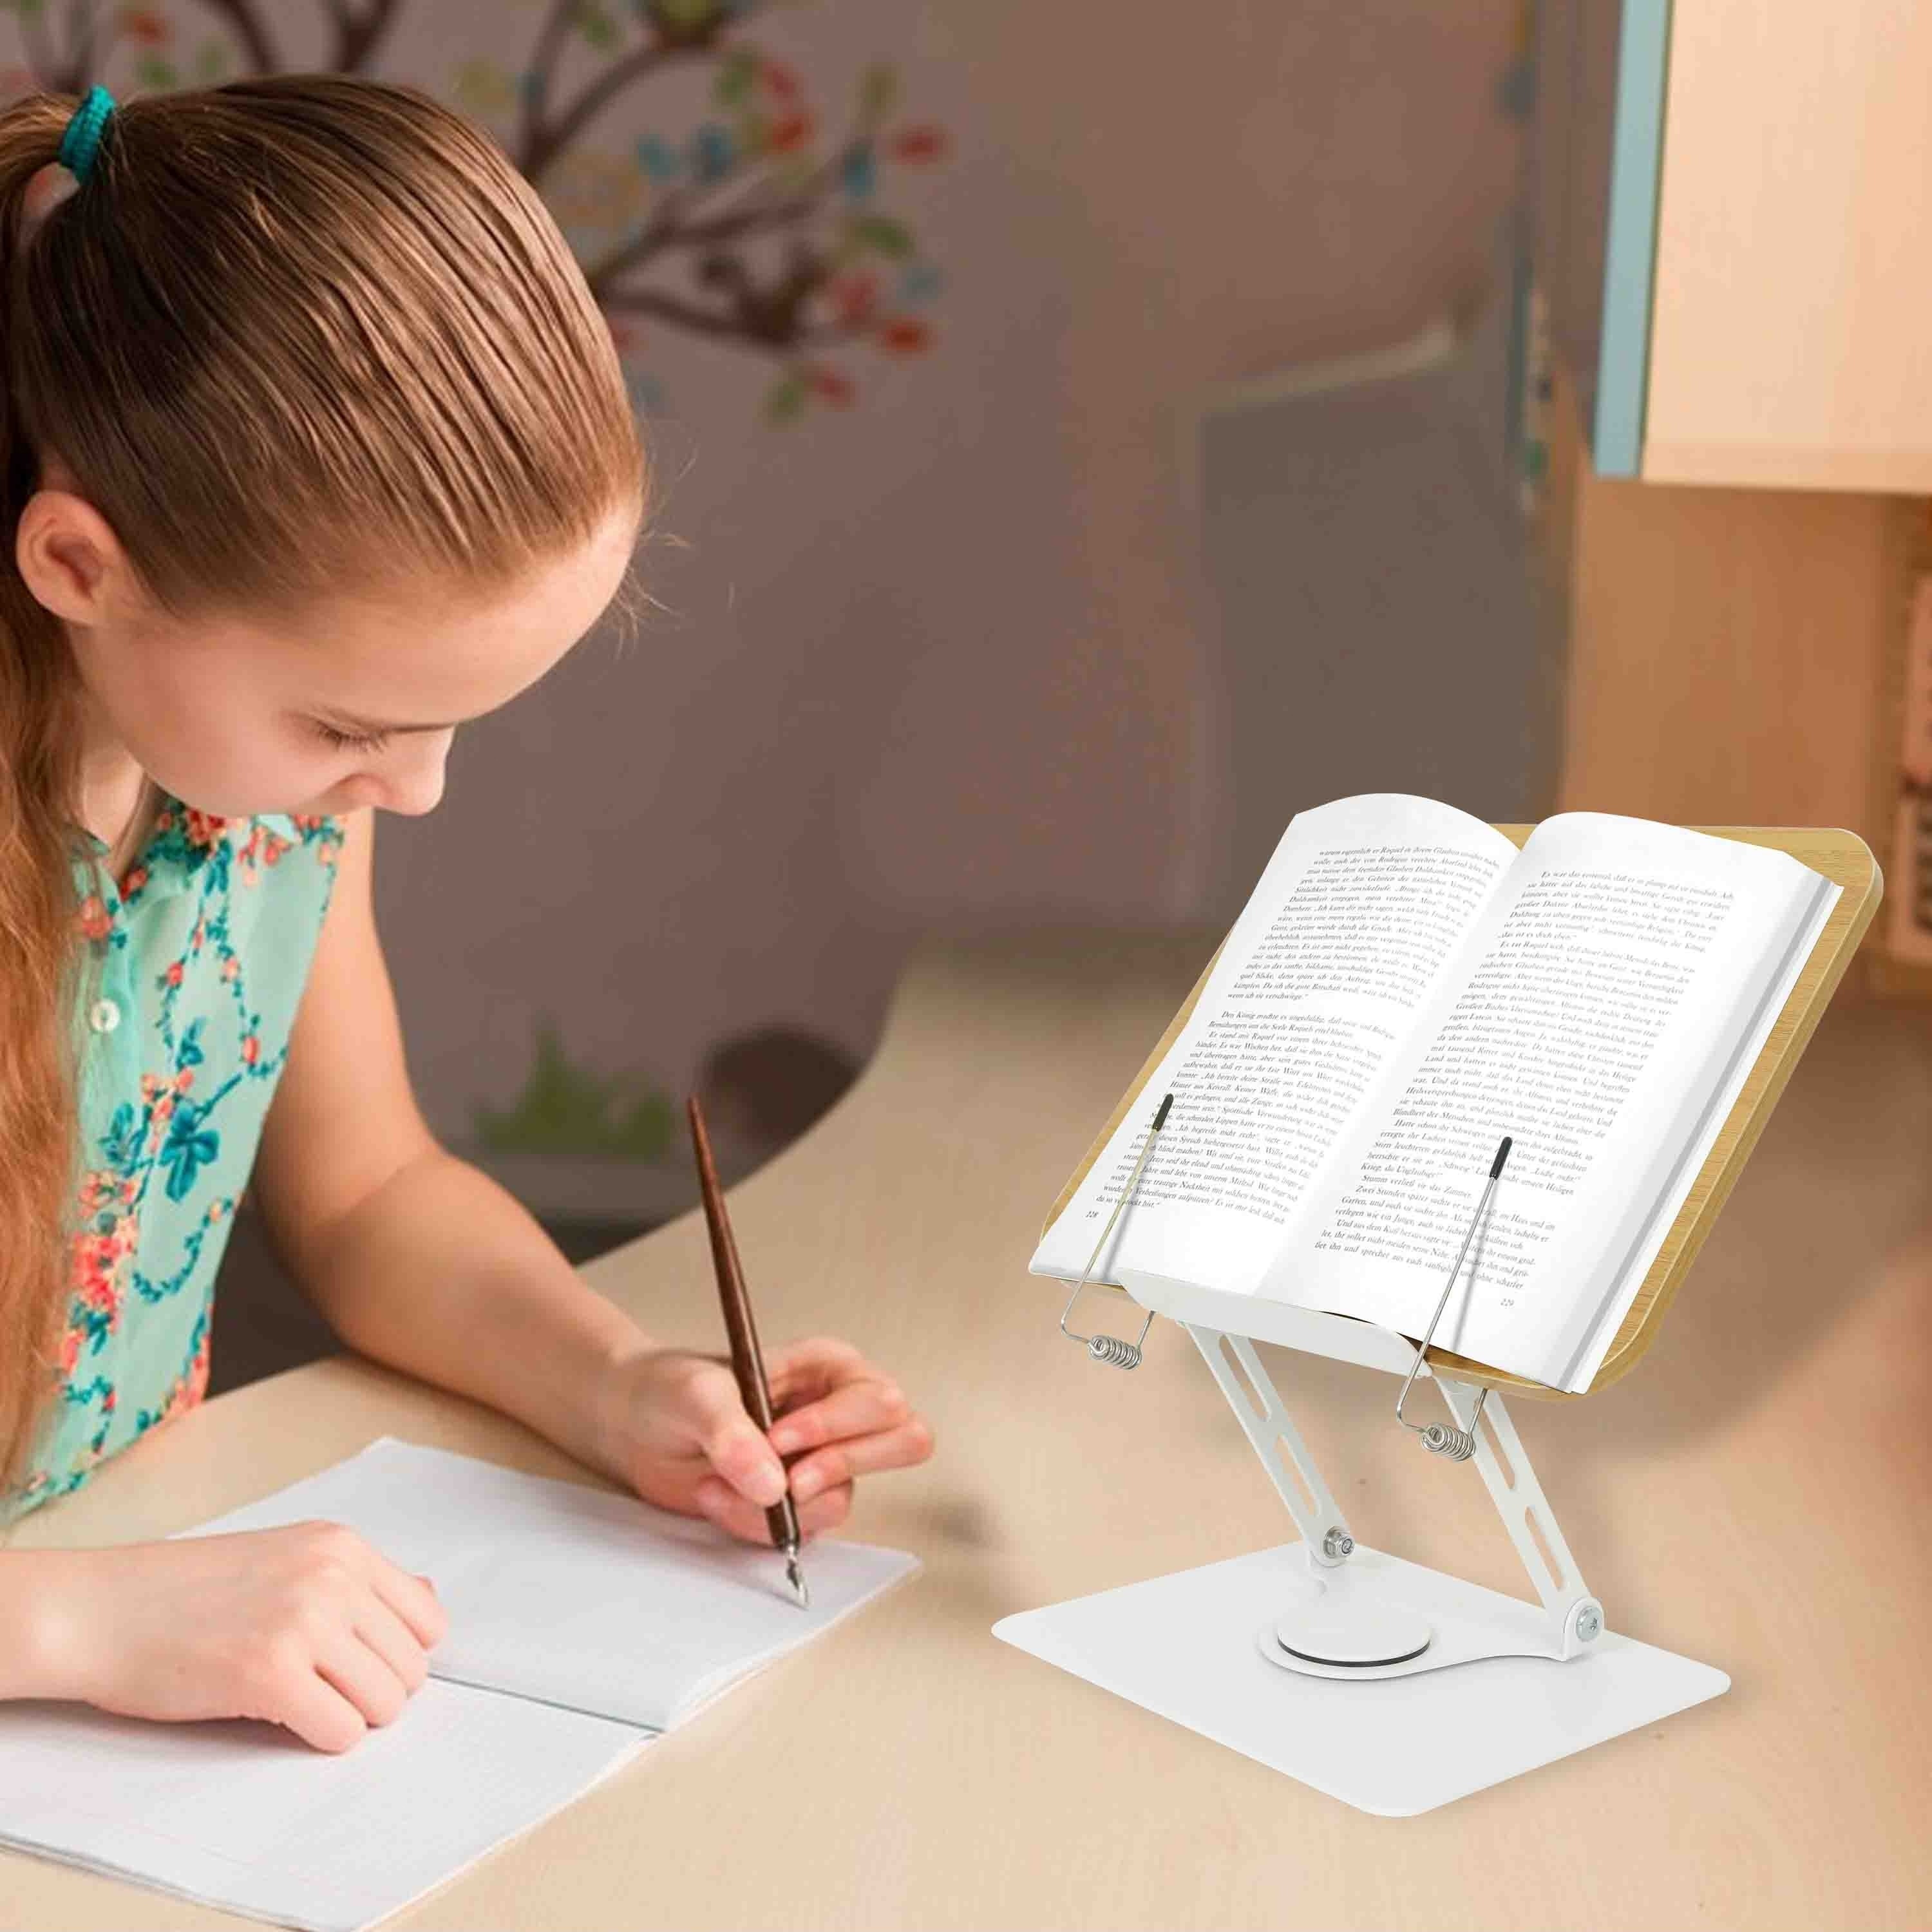 360° Rotate Book Stand Metal Book Holder with Paper Clips for